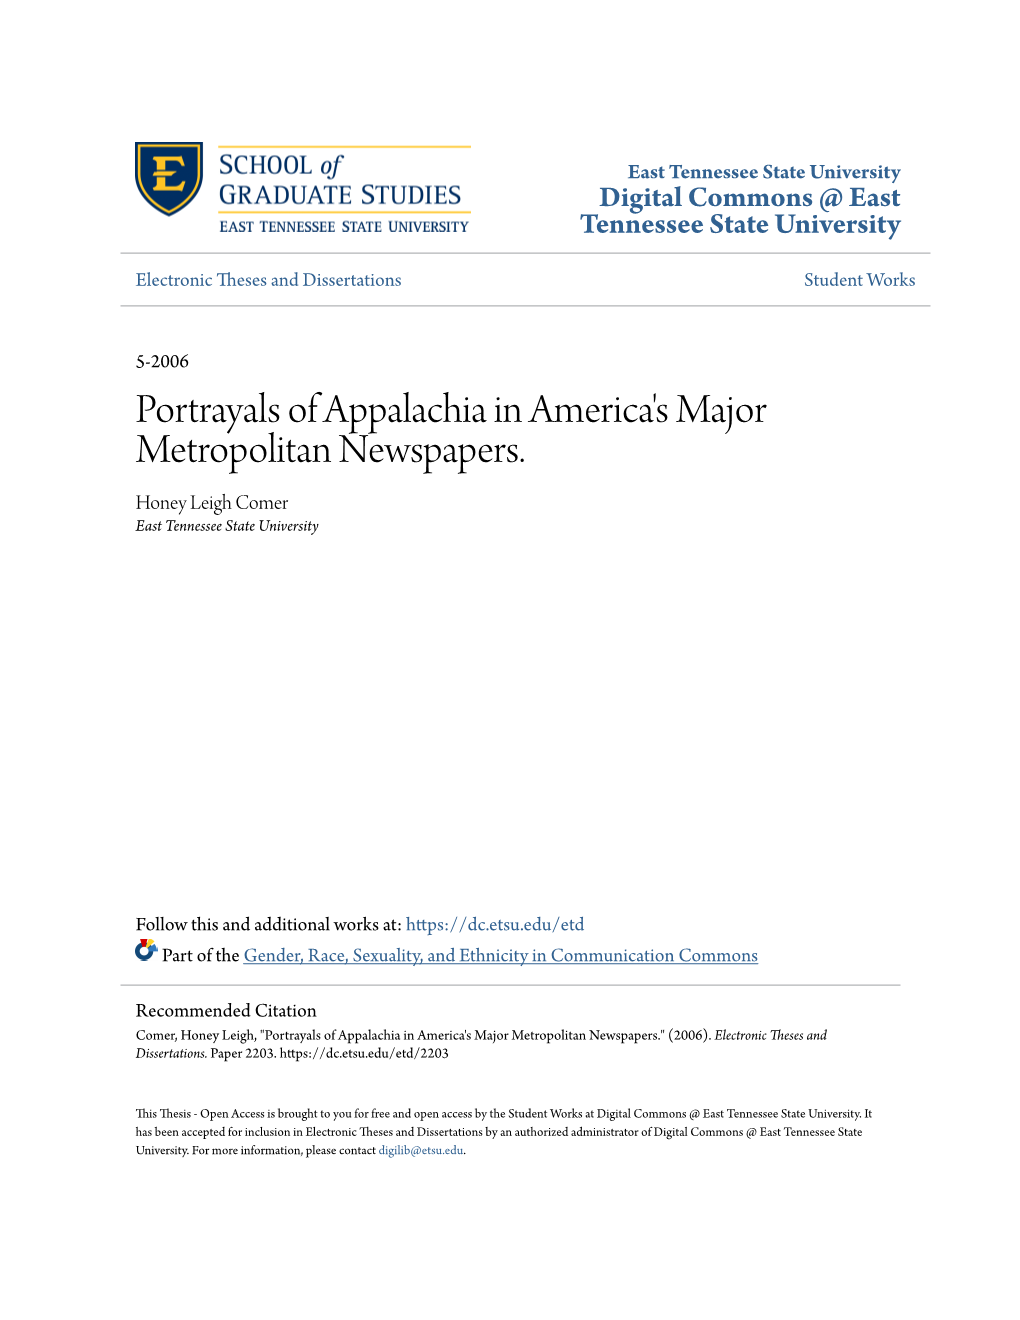 Portrayals of Appalachia in America's Major Metropolitan Newspapers. Honey Leigh Comer East Tennessee State University